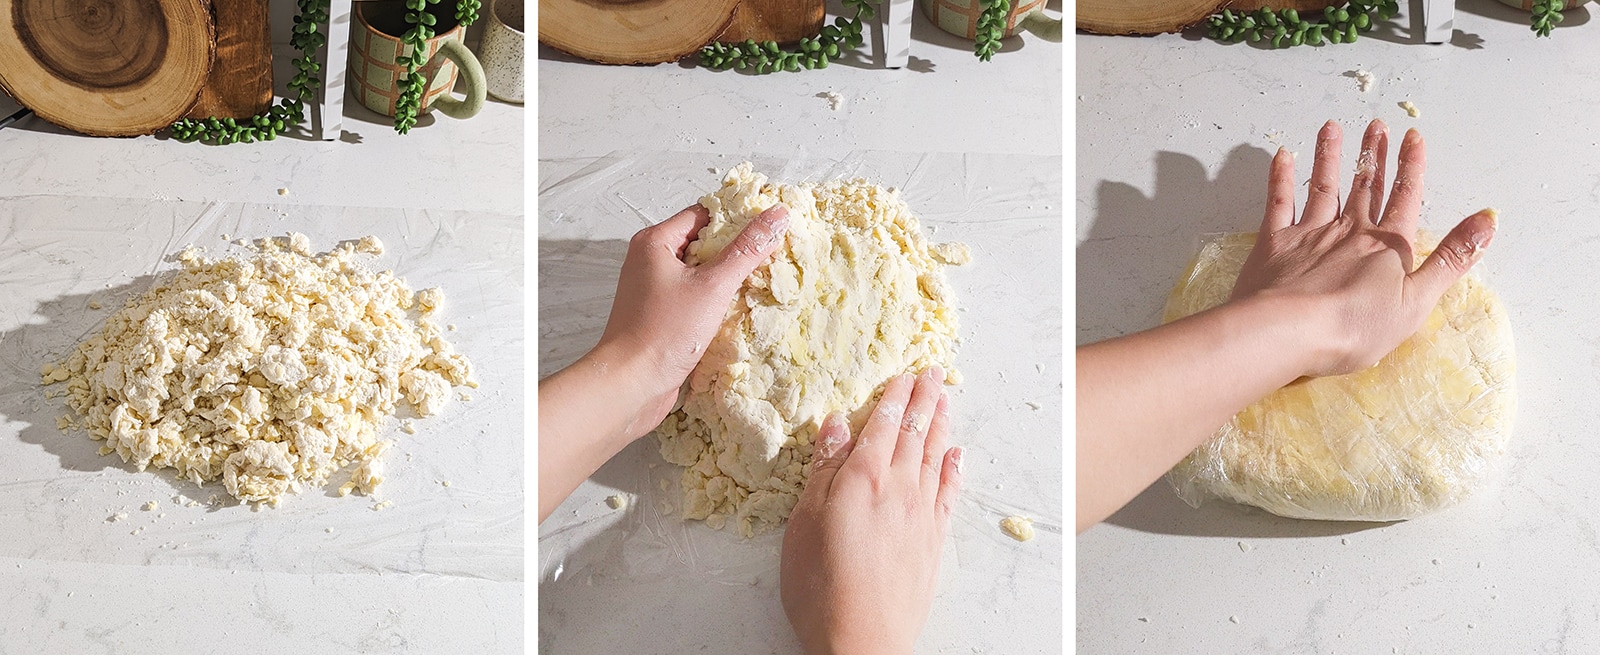 Folding and kneading dough on a counter.